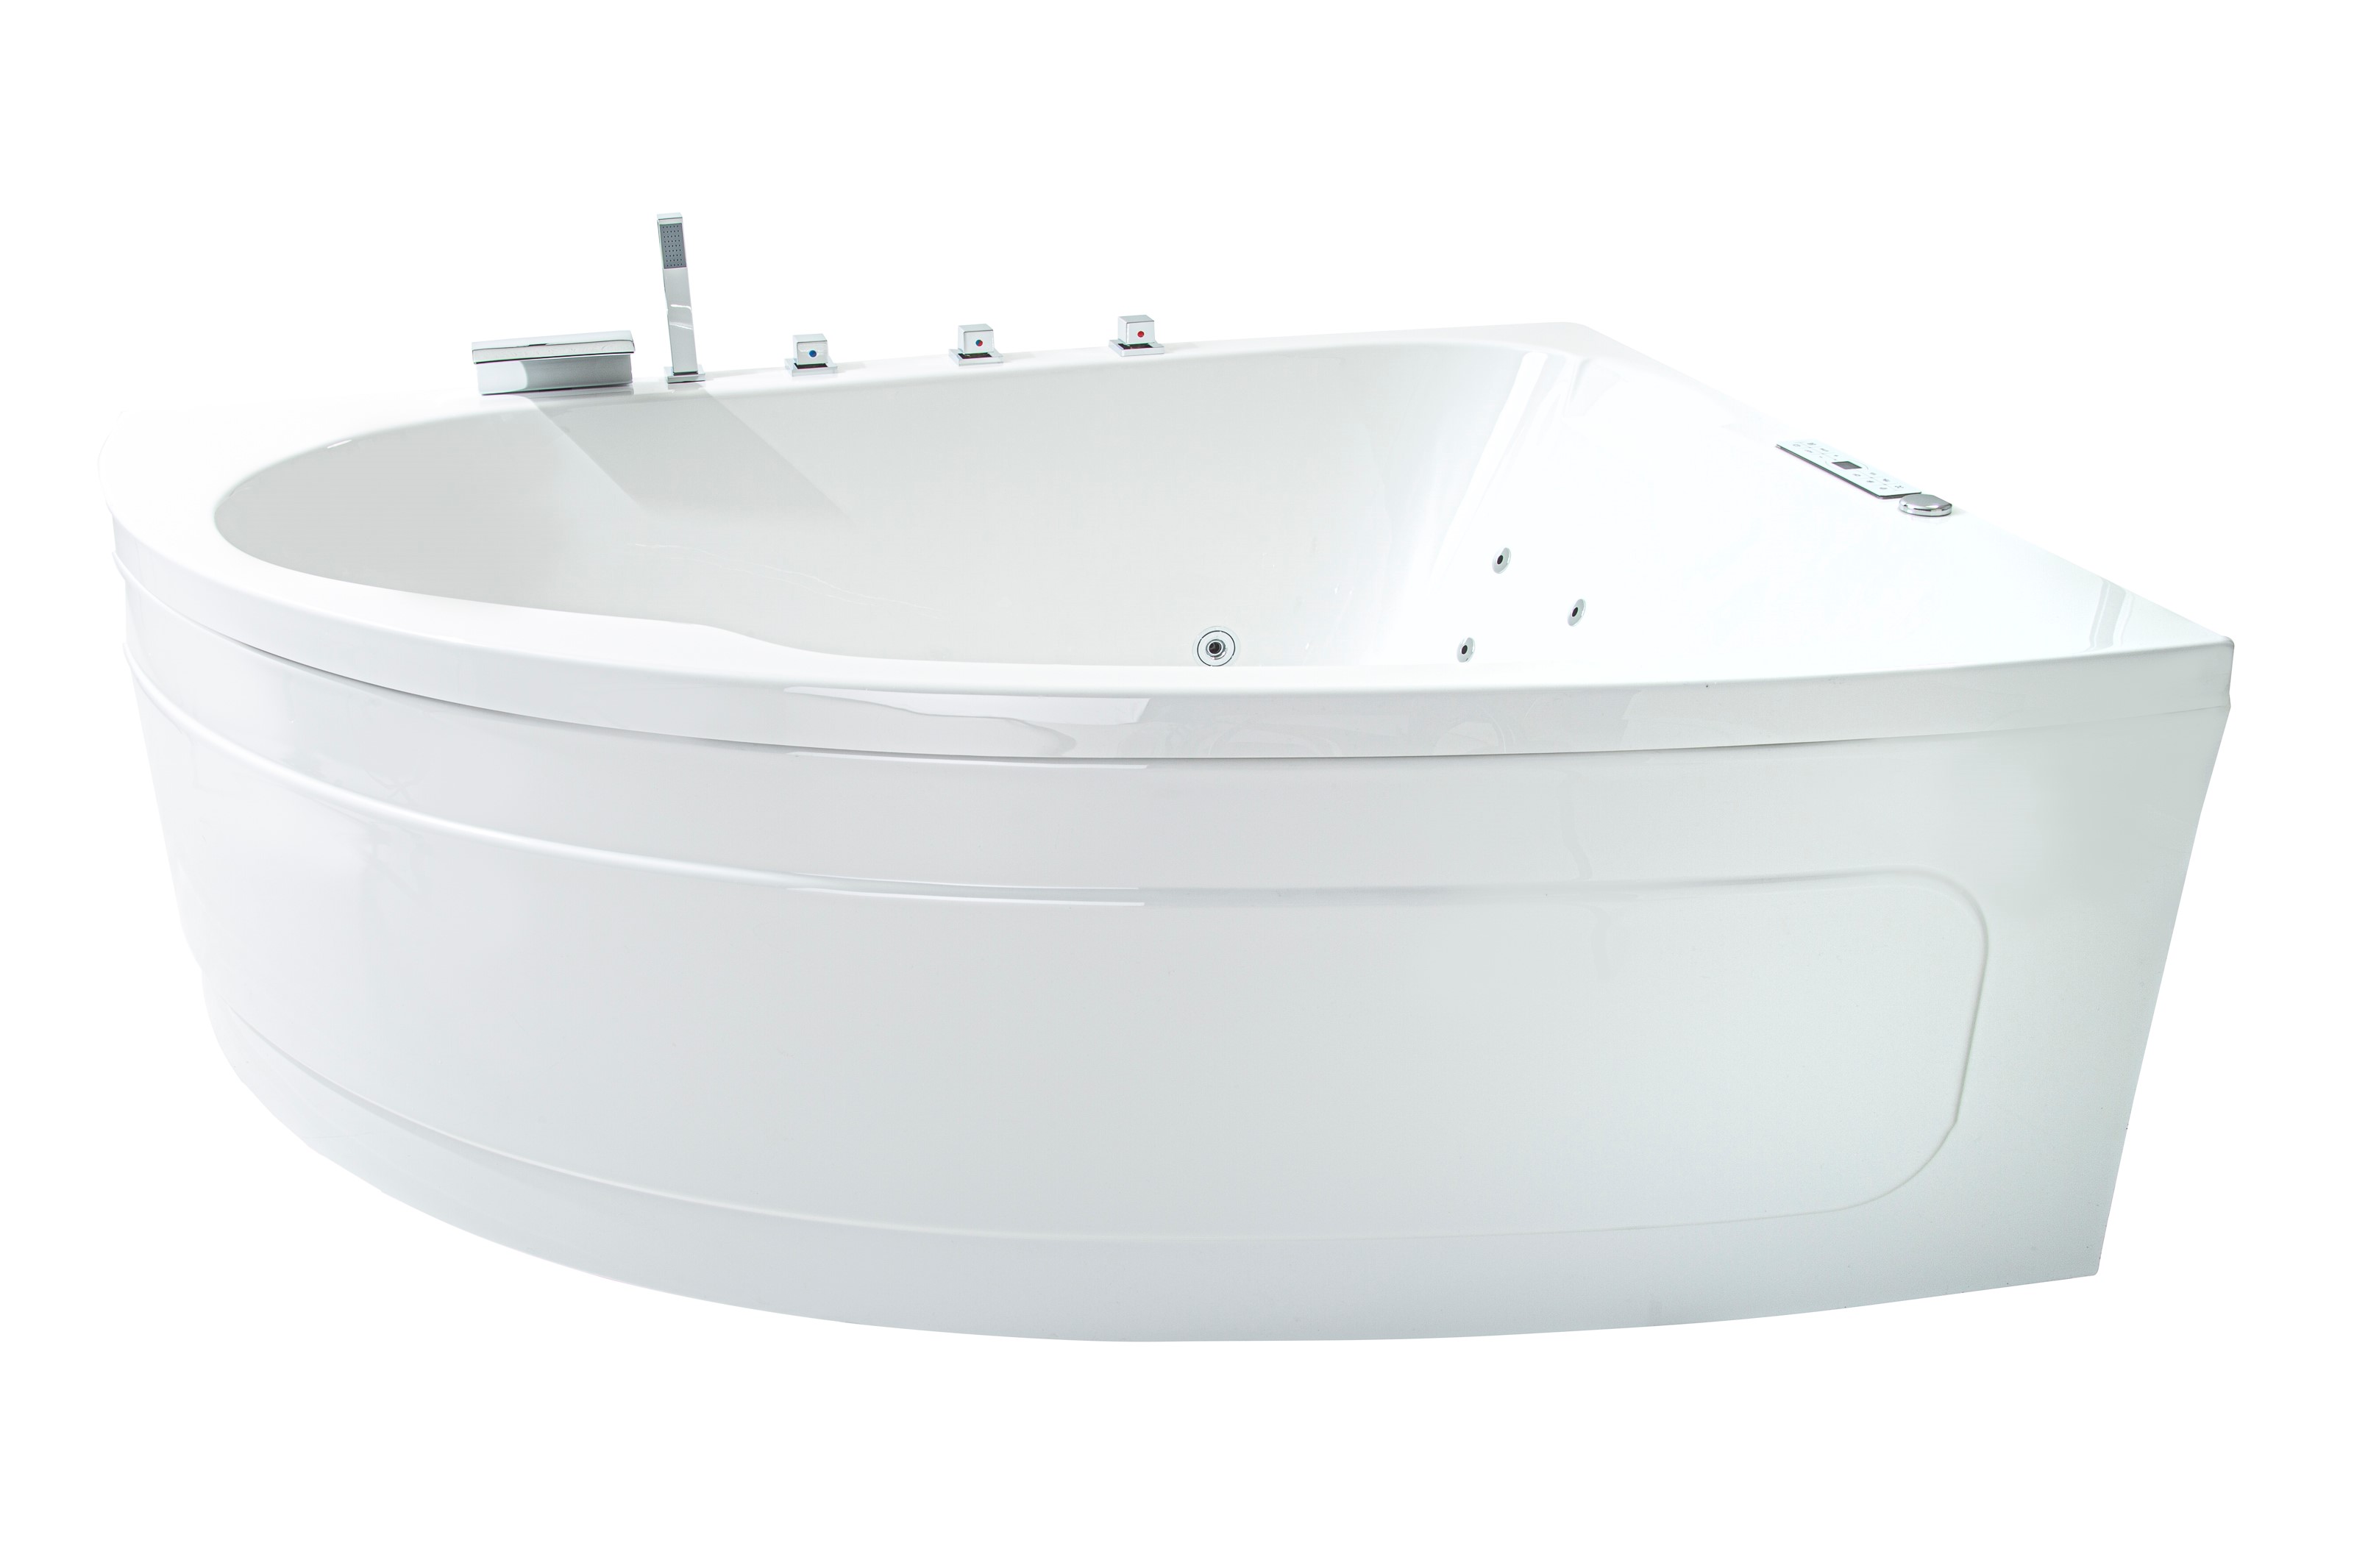 Baignoire d'angle Whirlpool Spa Bali Tulamben TWO droite 180x130 cm blanc MADE IN GERMANY